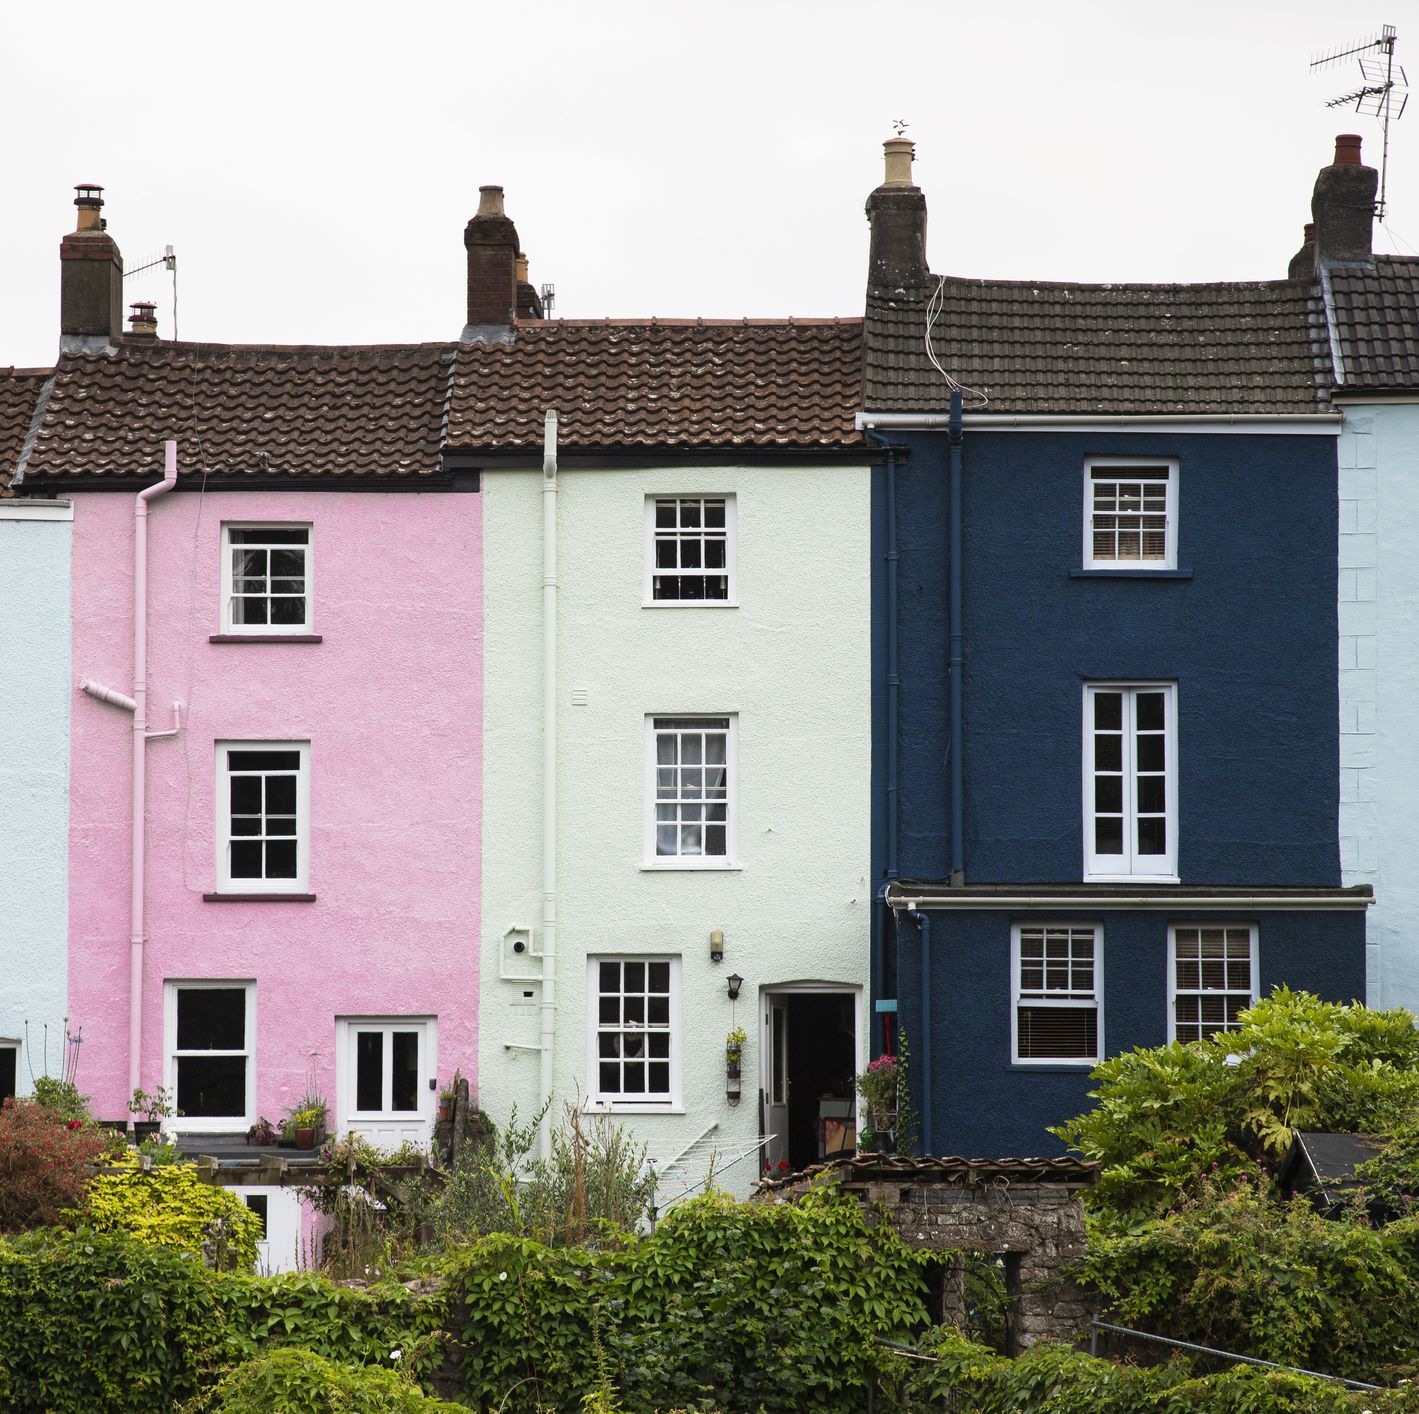 Row of Colourful Georgian Terraced Houses In Chepstow, Wales